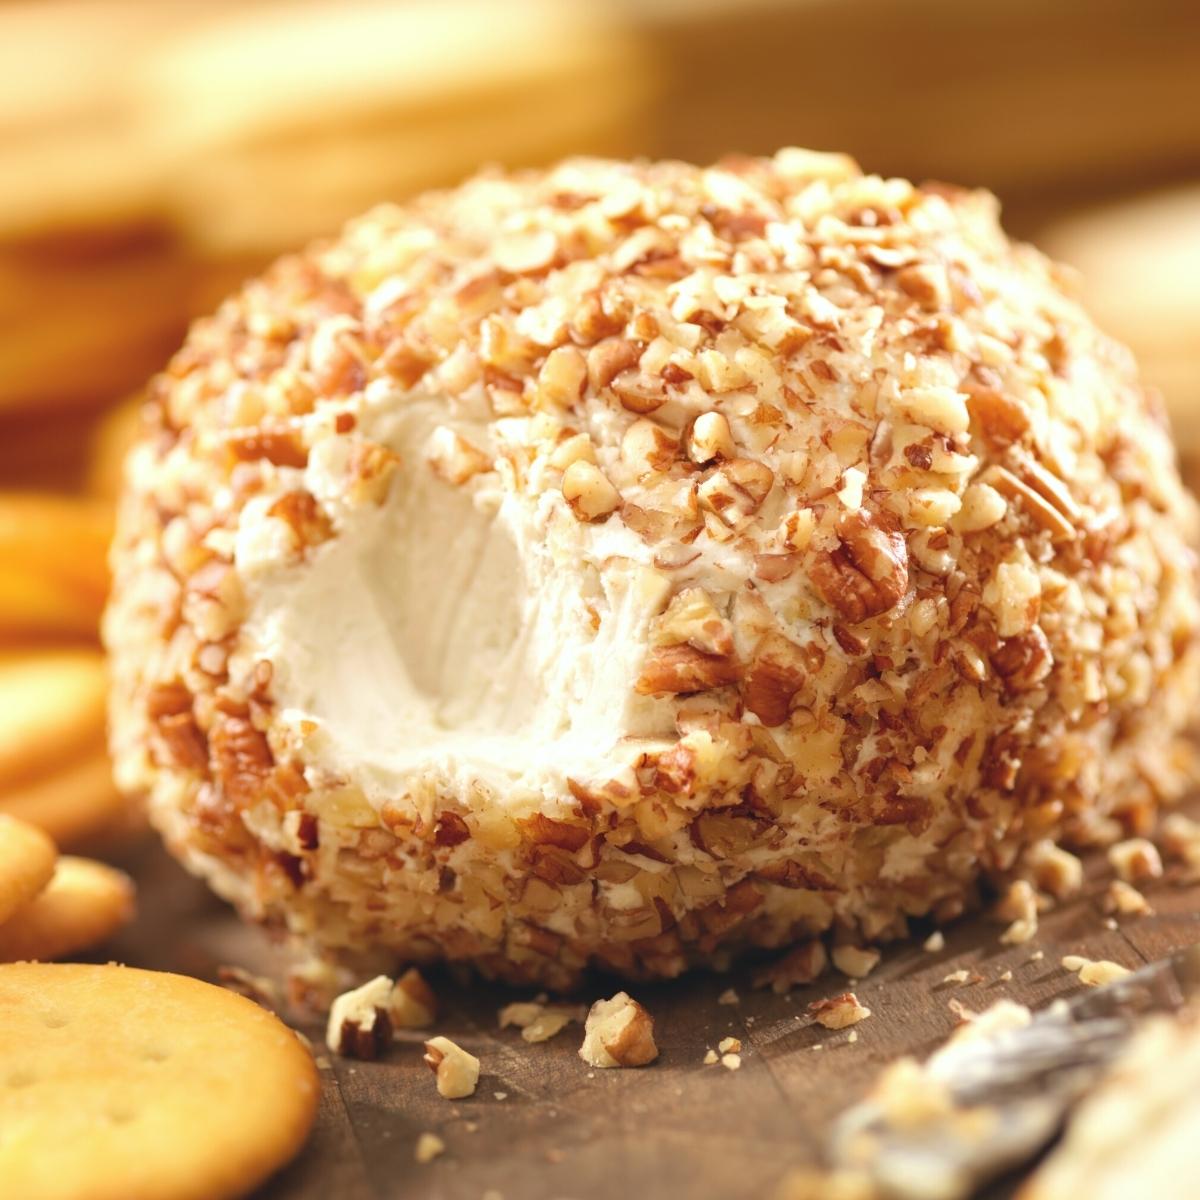 A crushed walnut coated cheeseball surrounded by round Ritz crackers.